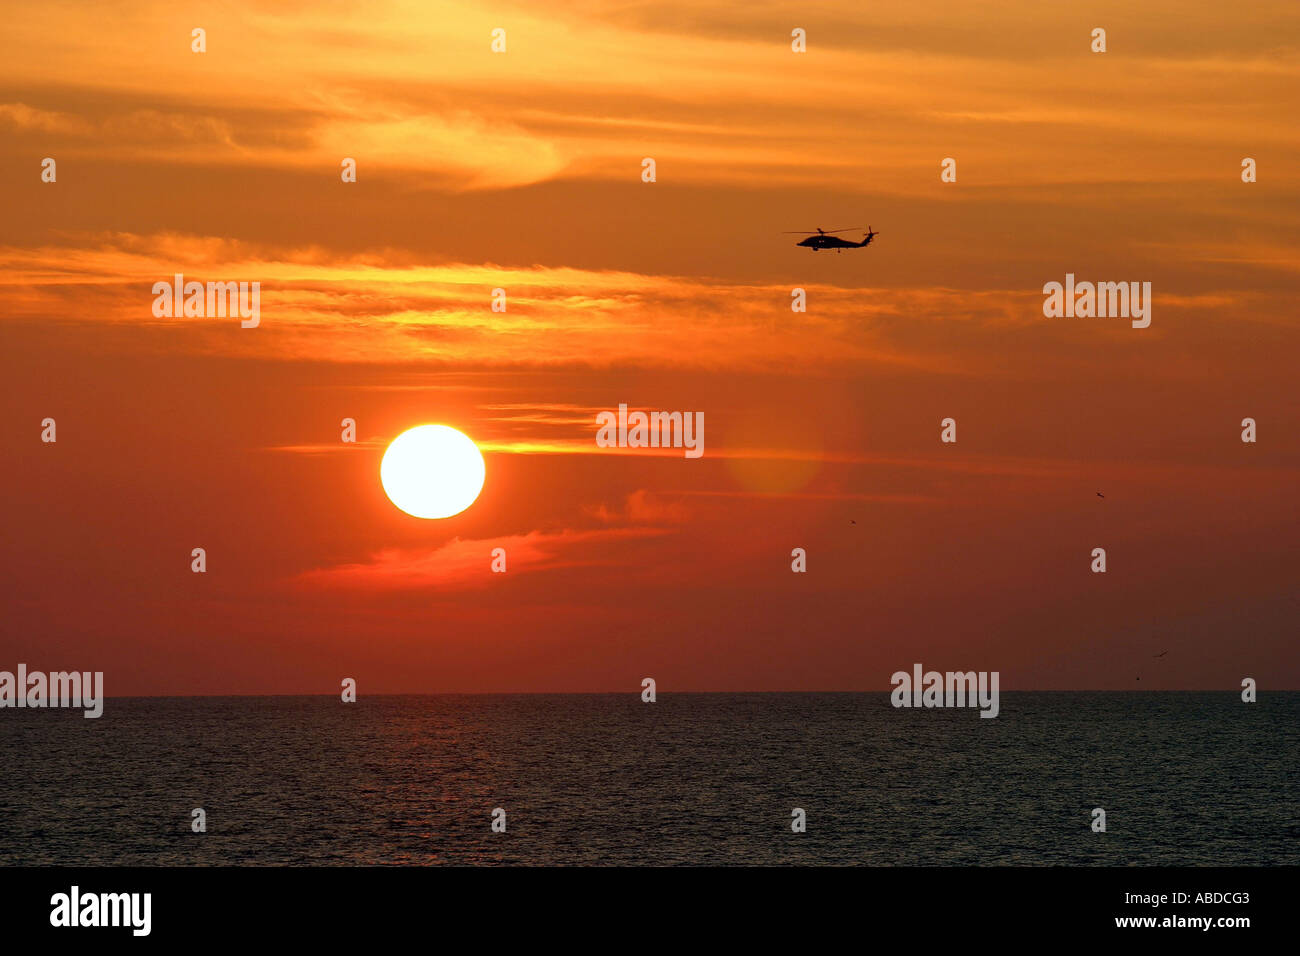 Sunset with helicopter Stock Photo